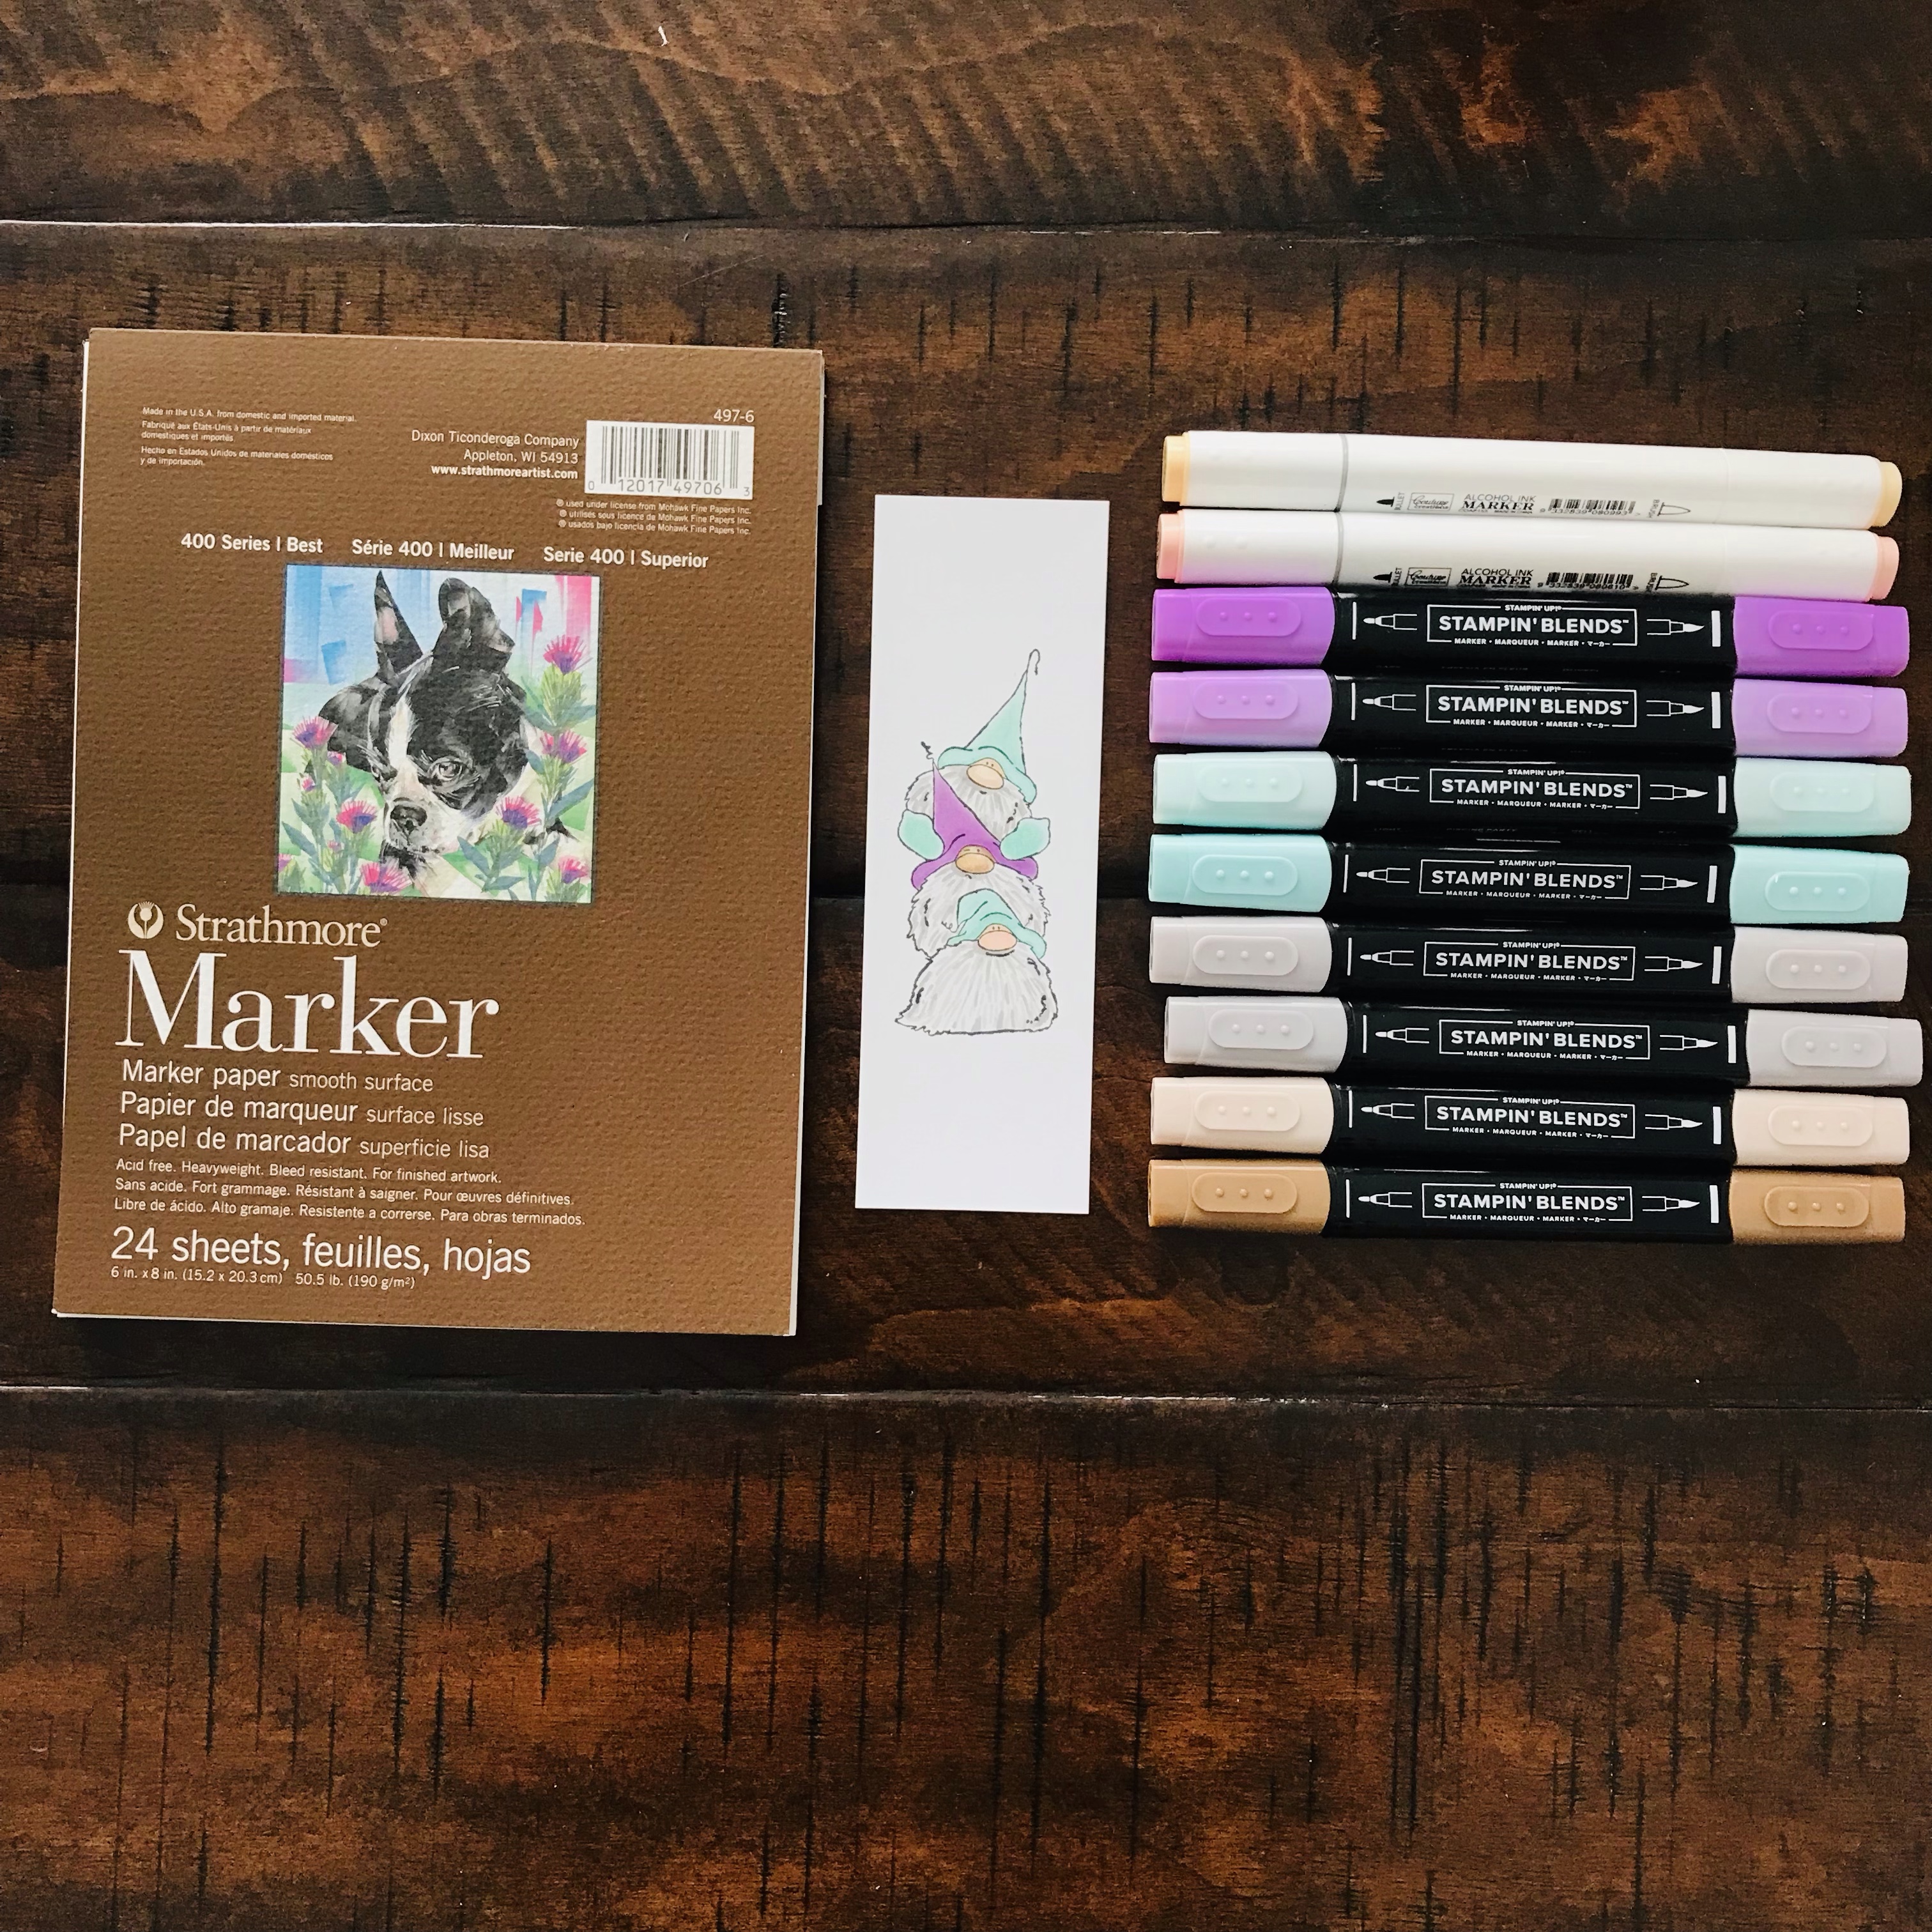 Stampin' Blends Markers Review - The Artistic Gnome Blog